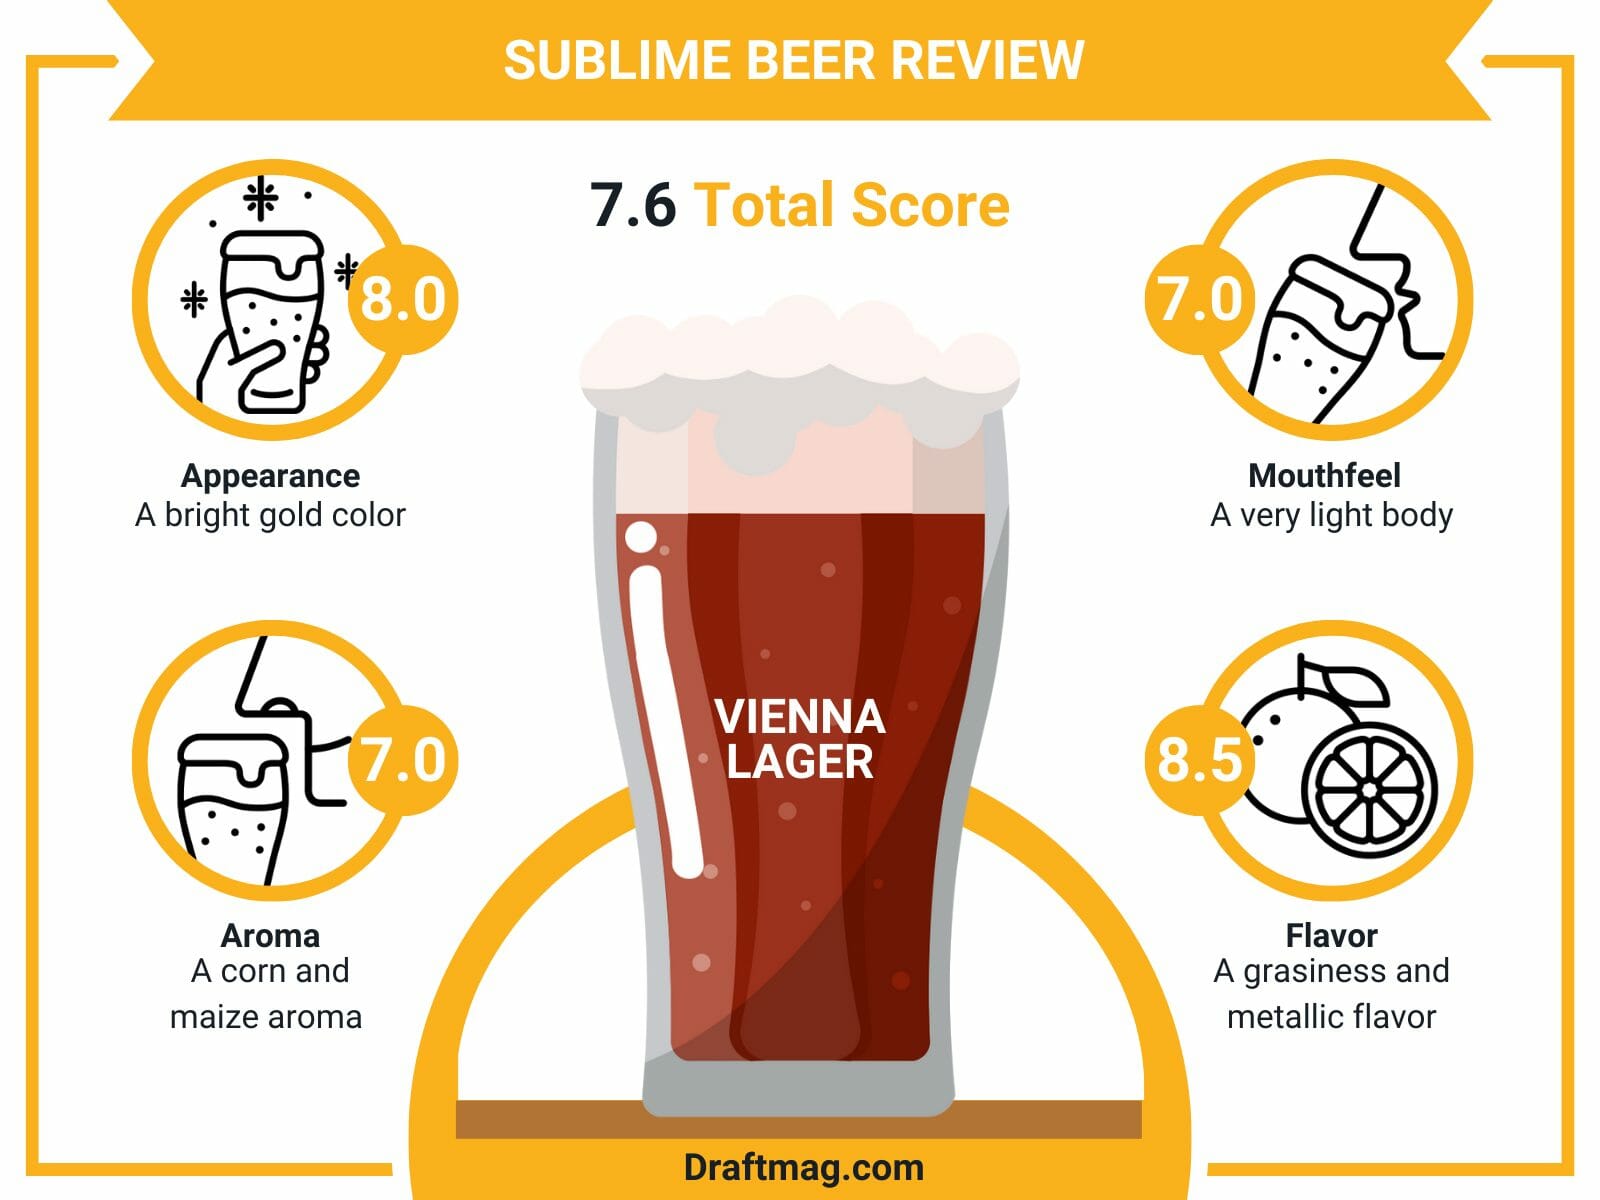 Sublime beer review infographic